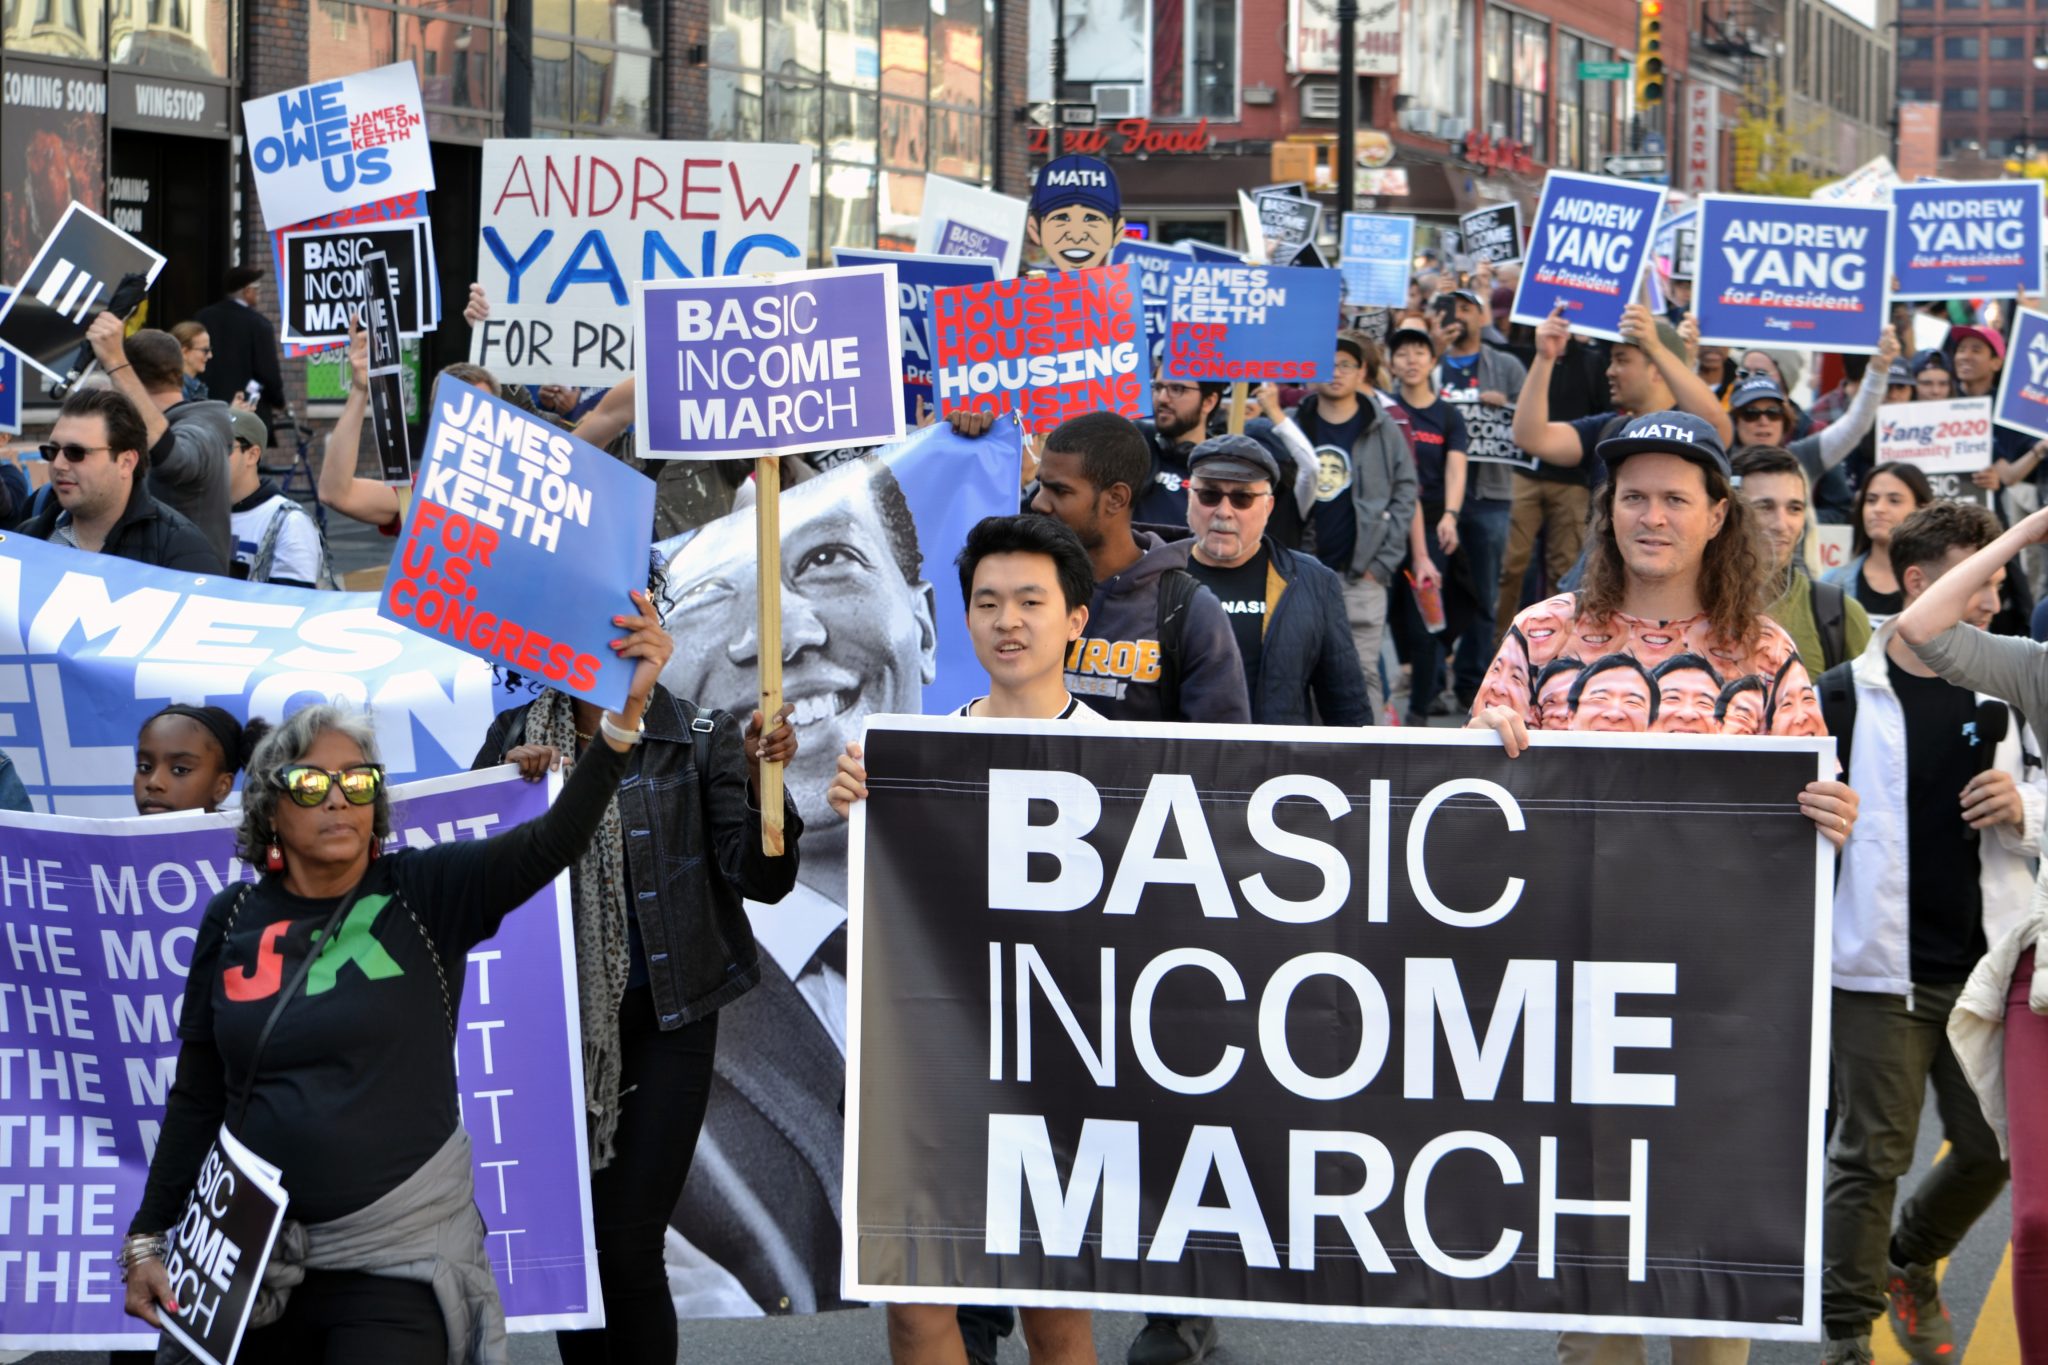 Universal Basic Income March